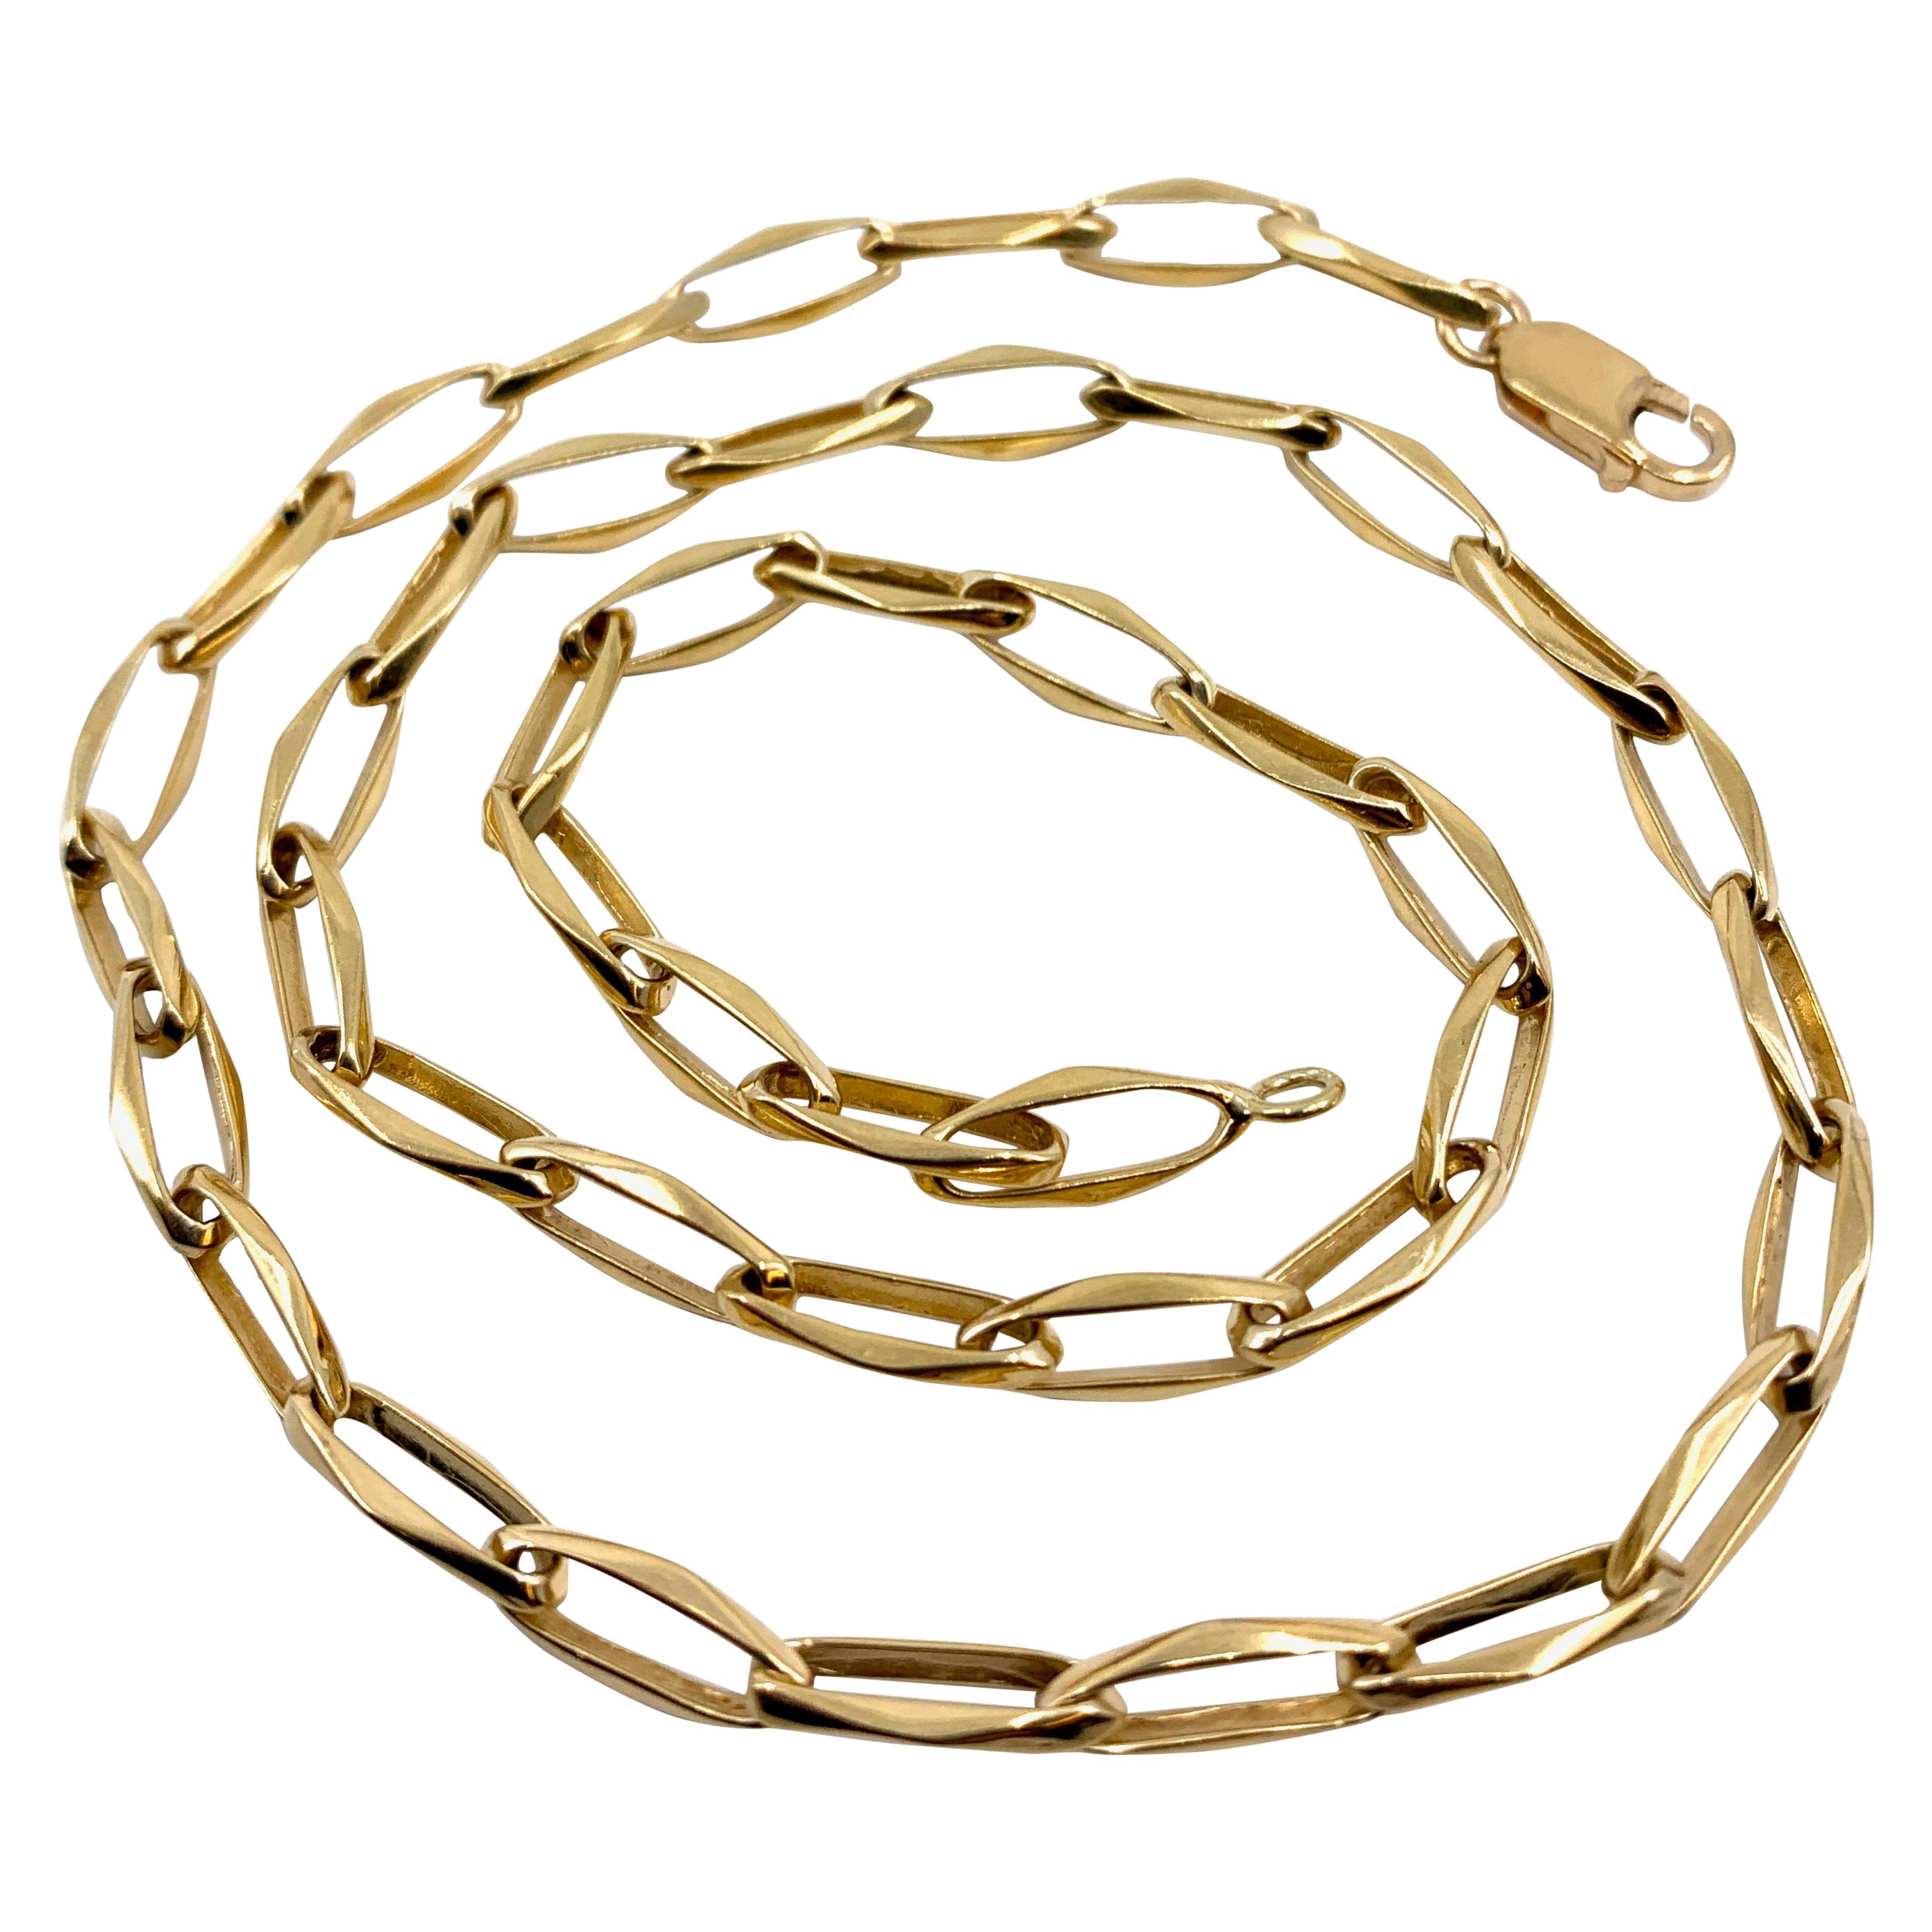 Chain with Elongated, Sculptural Links in Yellow Gold, circa 1990